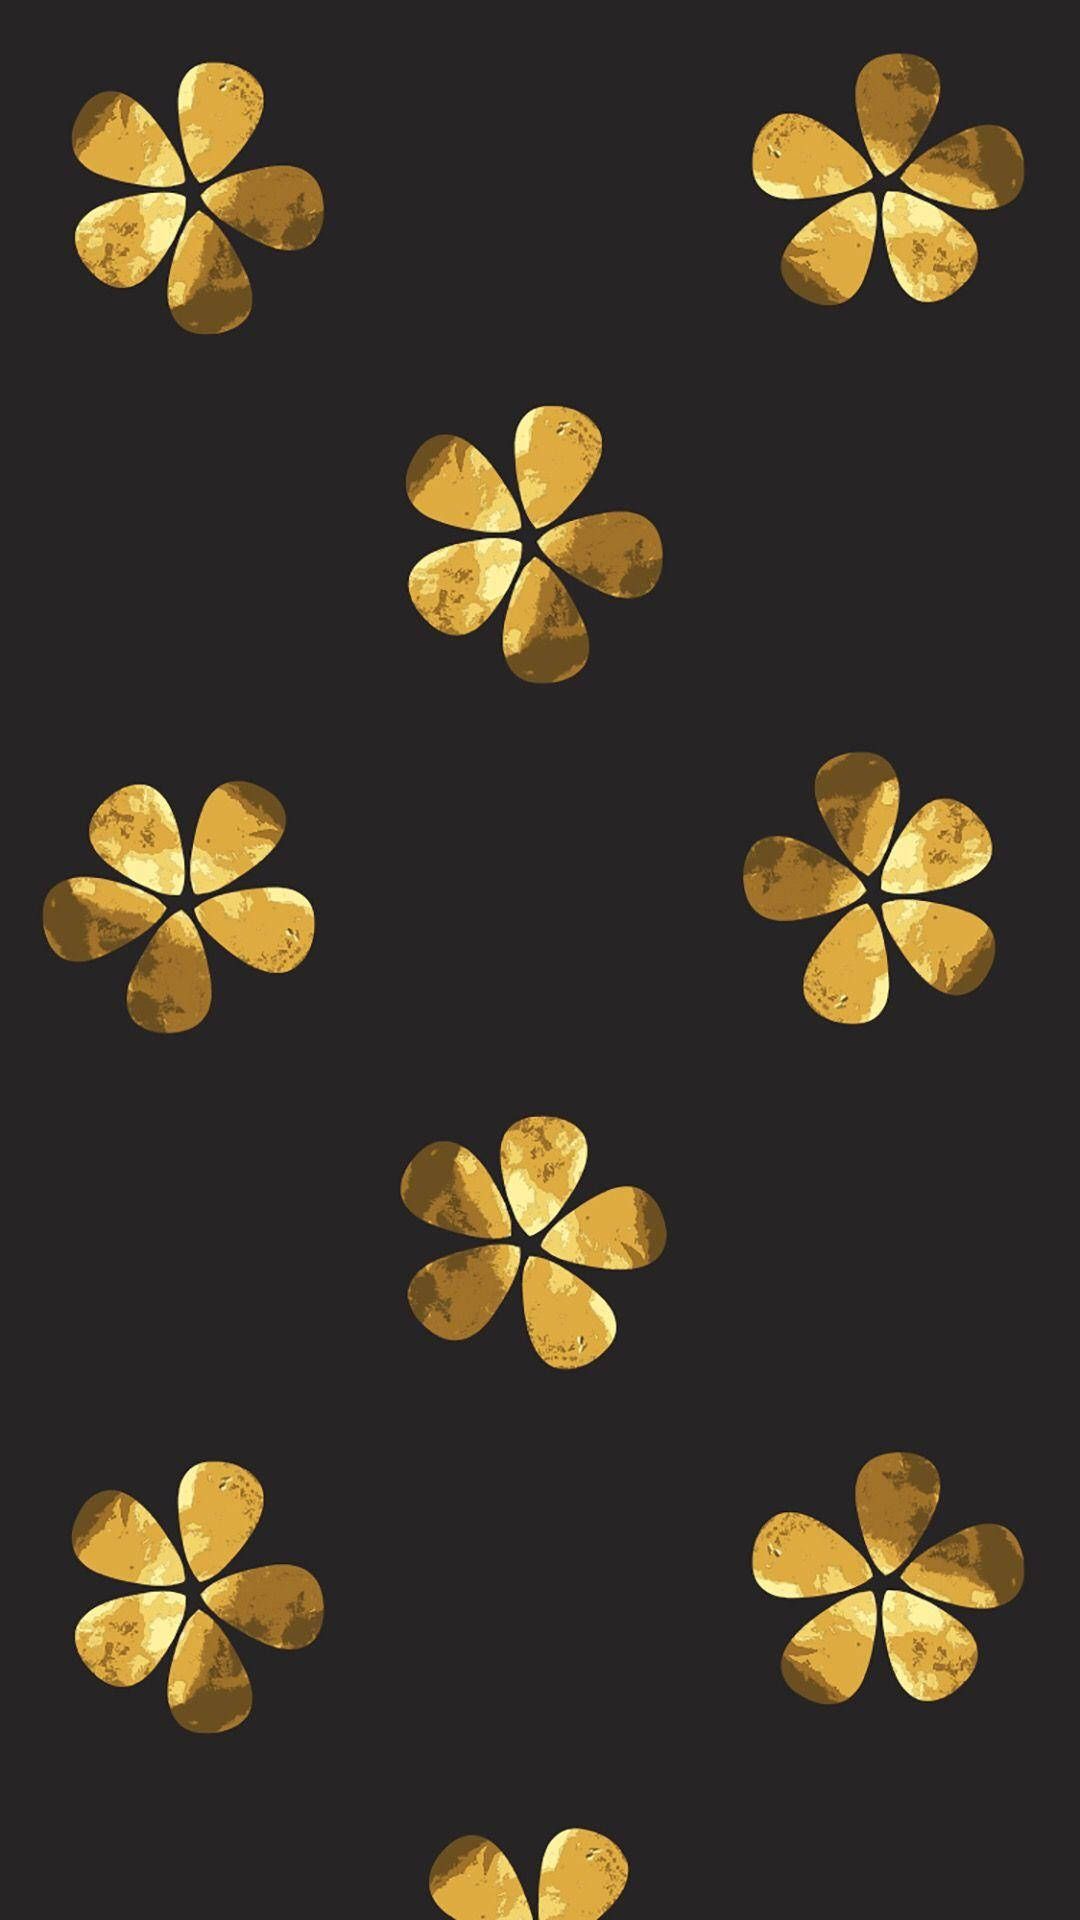 IPhone wallpaper with gold flowers on a black background - Gold